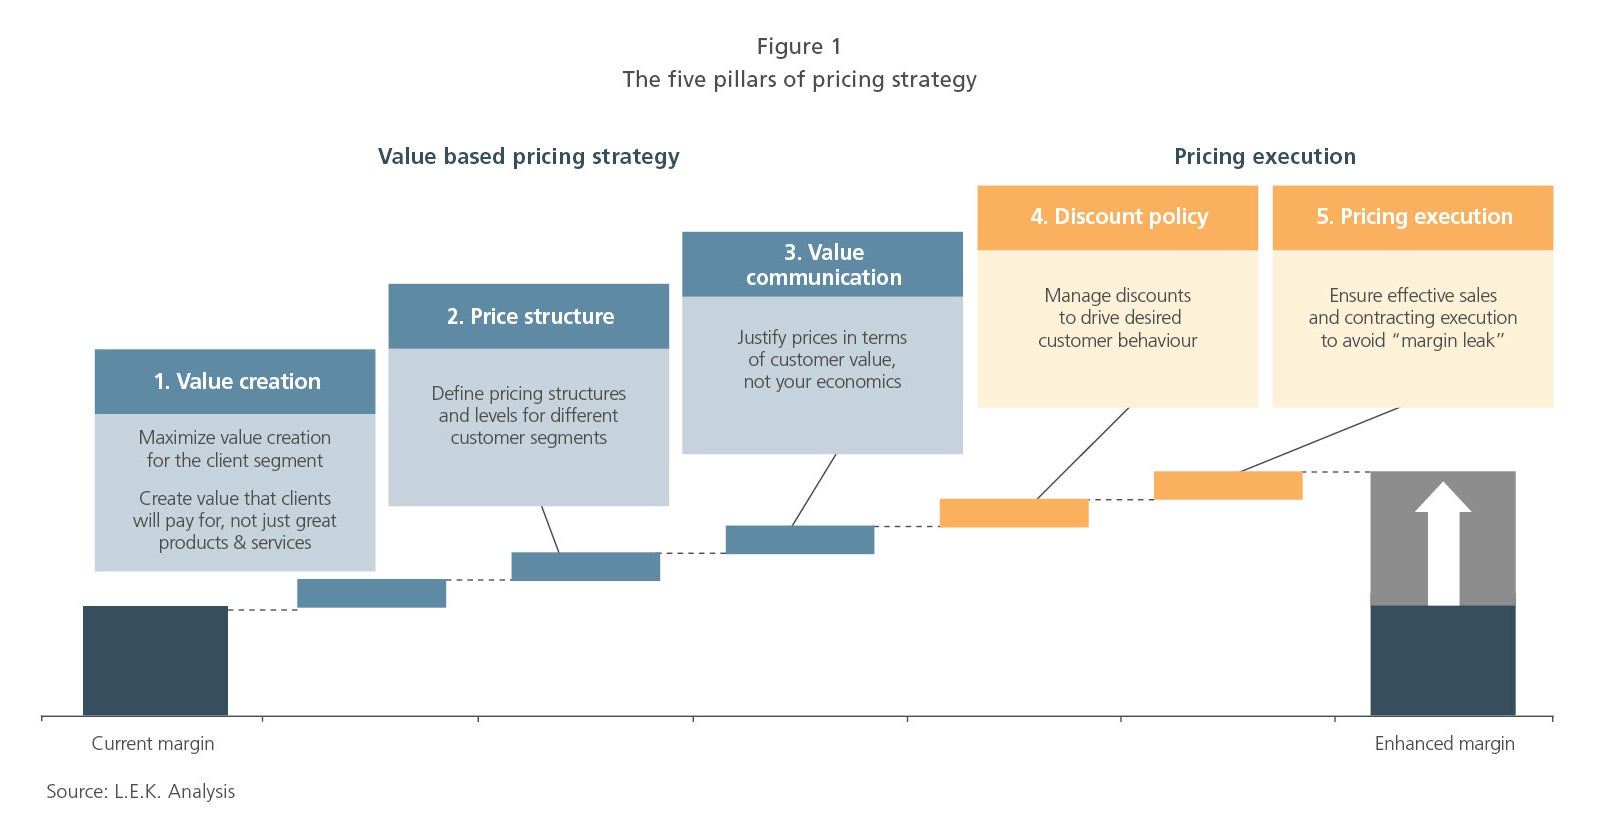 The five pillars of pricing strategy